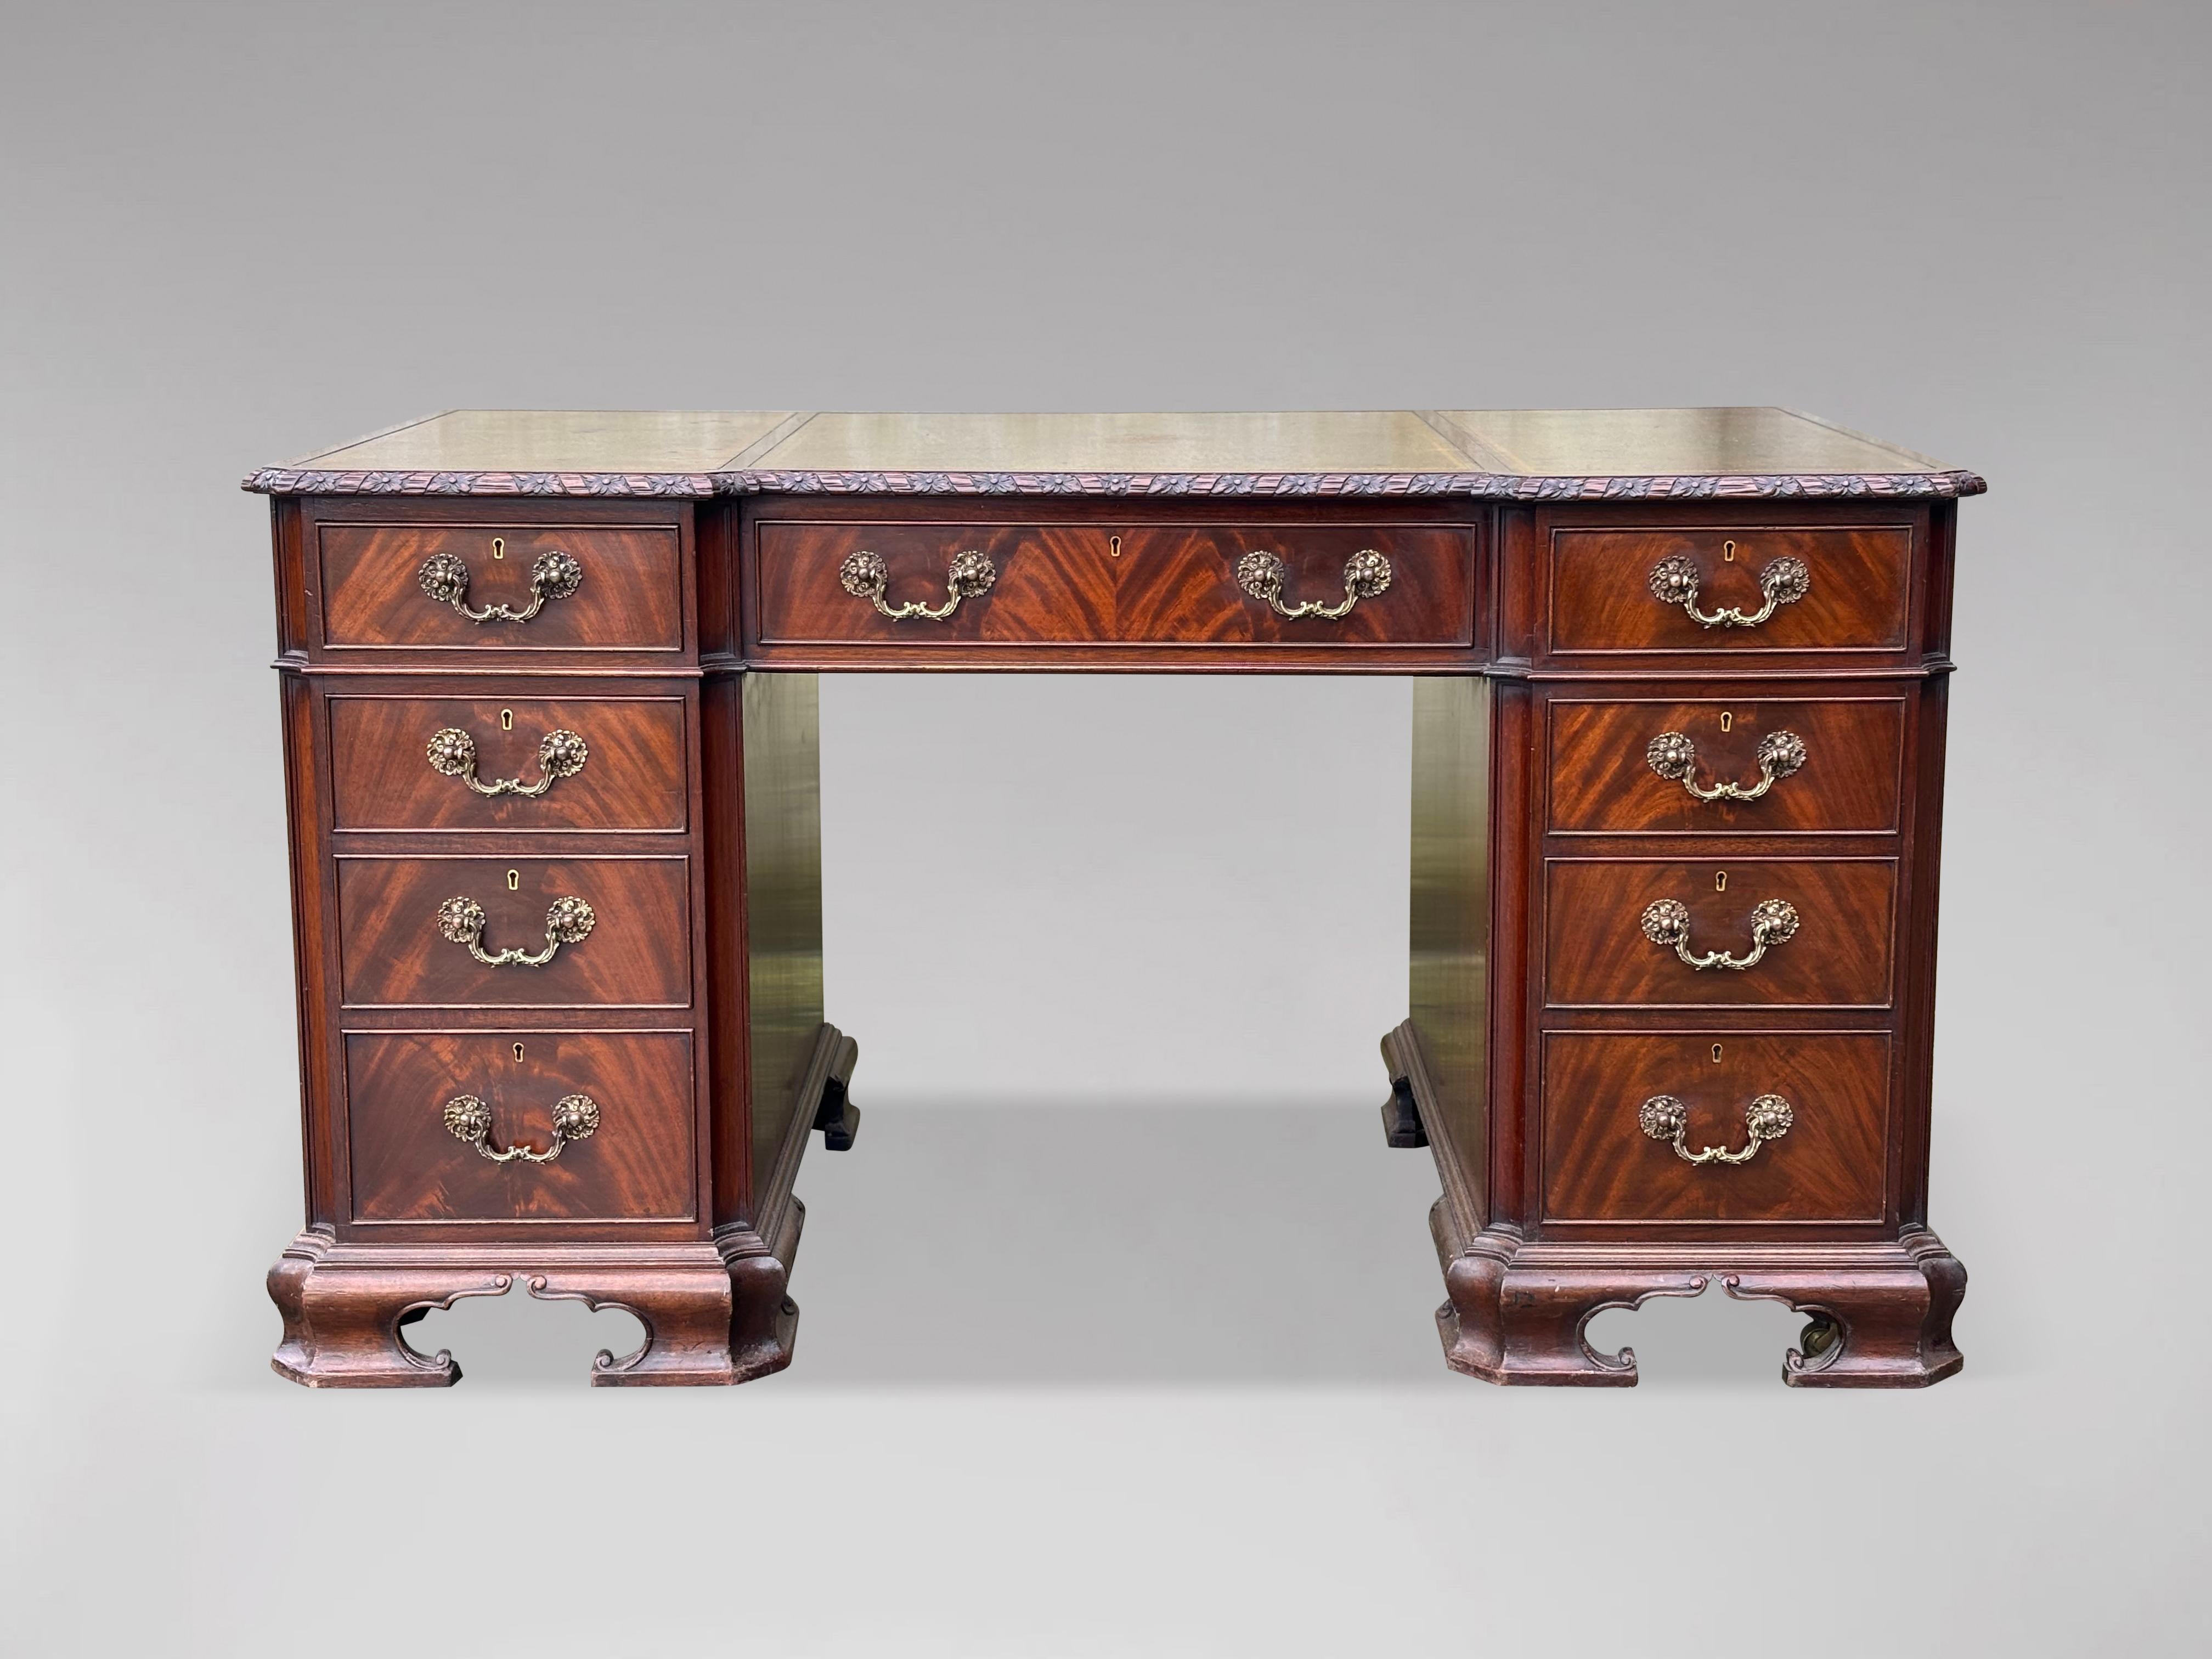 British 19th Century Chippendale Style Mahogany Pedestal Desk For Sale